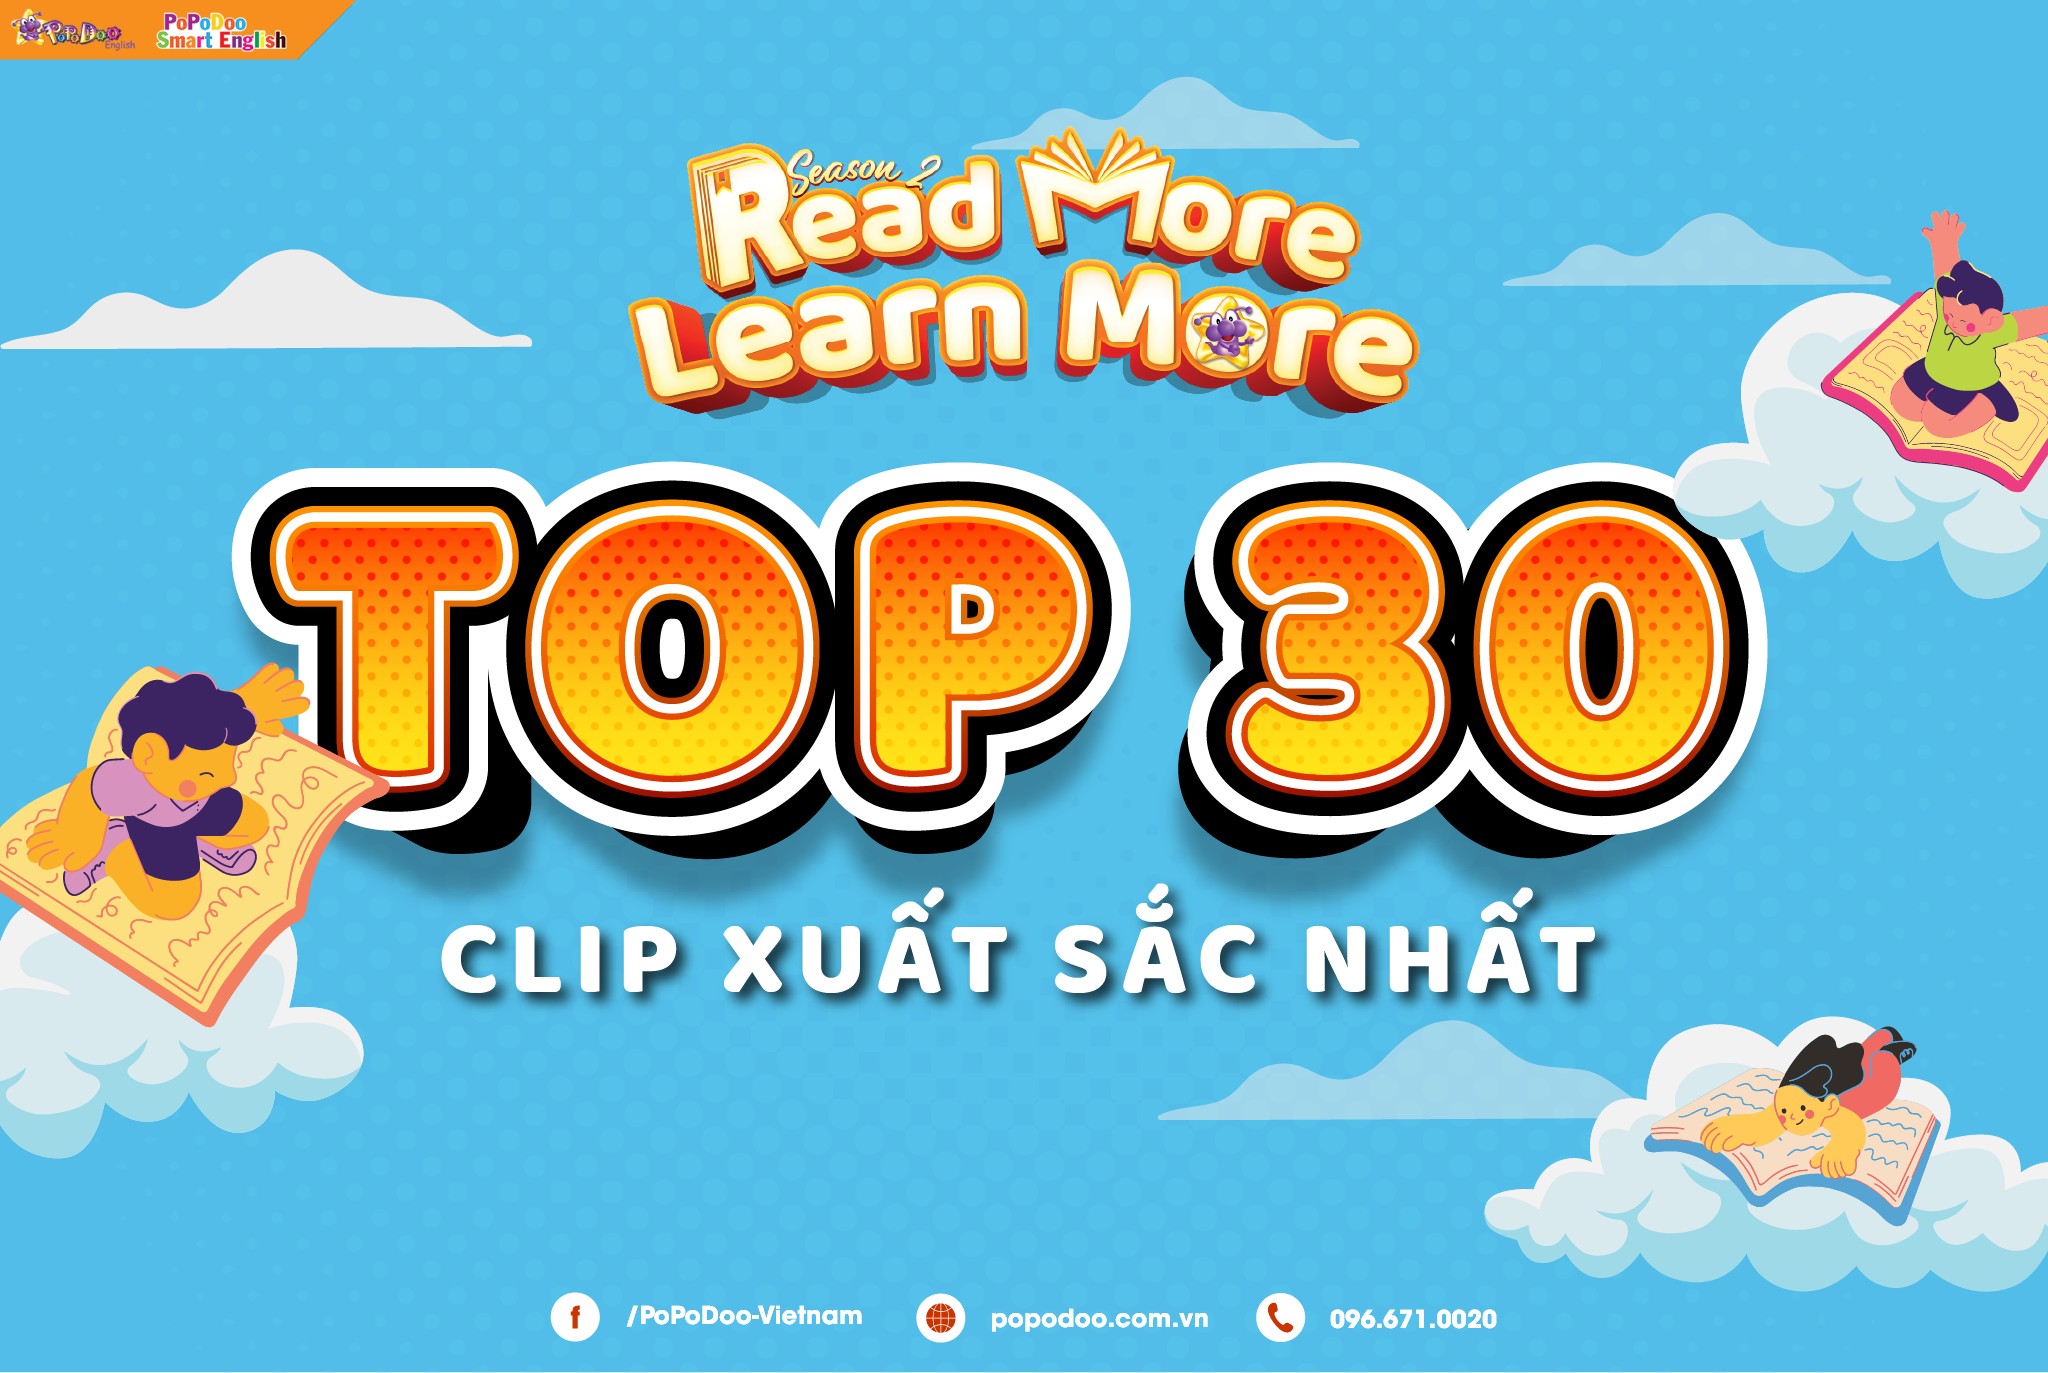 TOP 30 CLIPS XUẤT SẮC NHẤT READ MORE - LEARN MORE MÙA 2